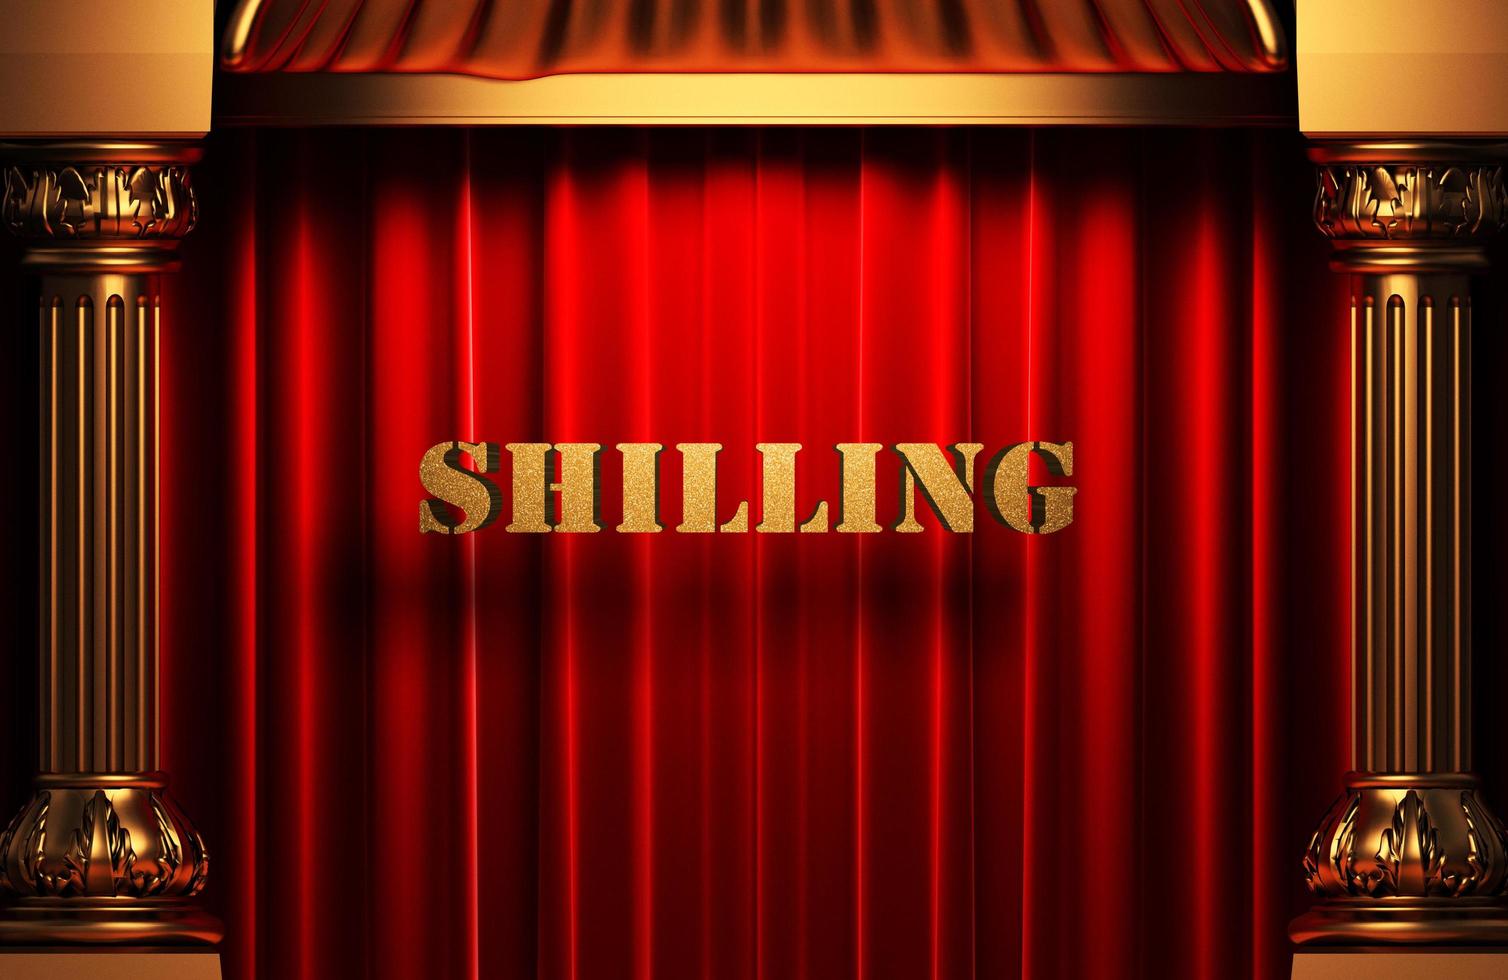 shilling golden word on red curtain photo